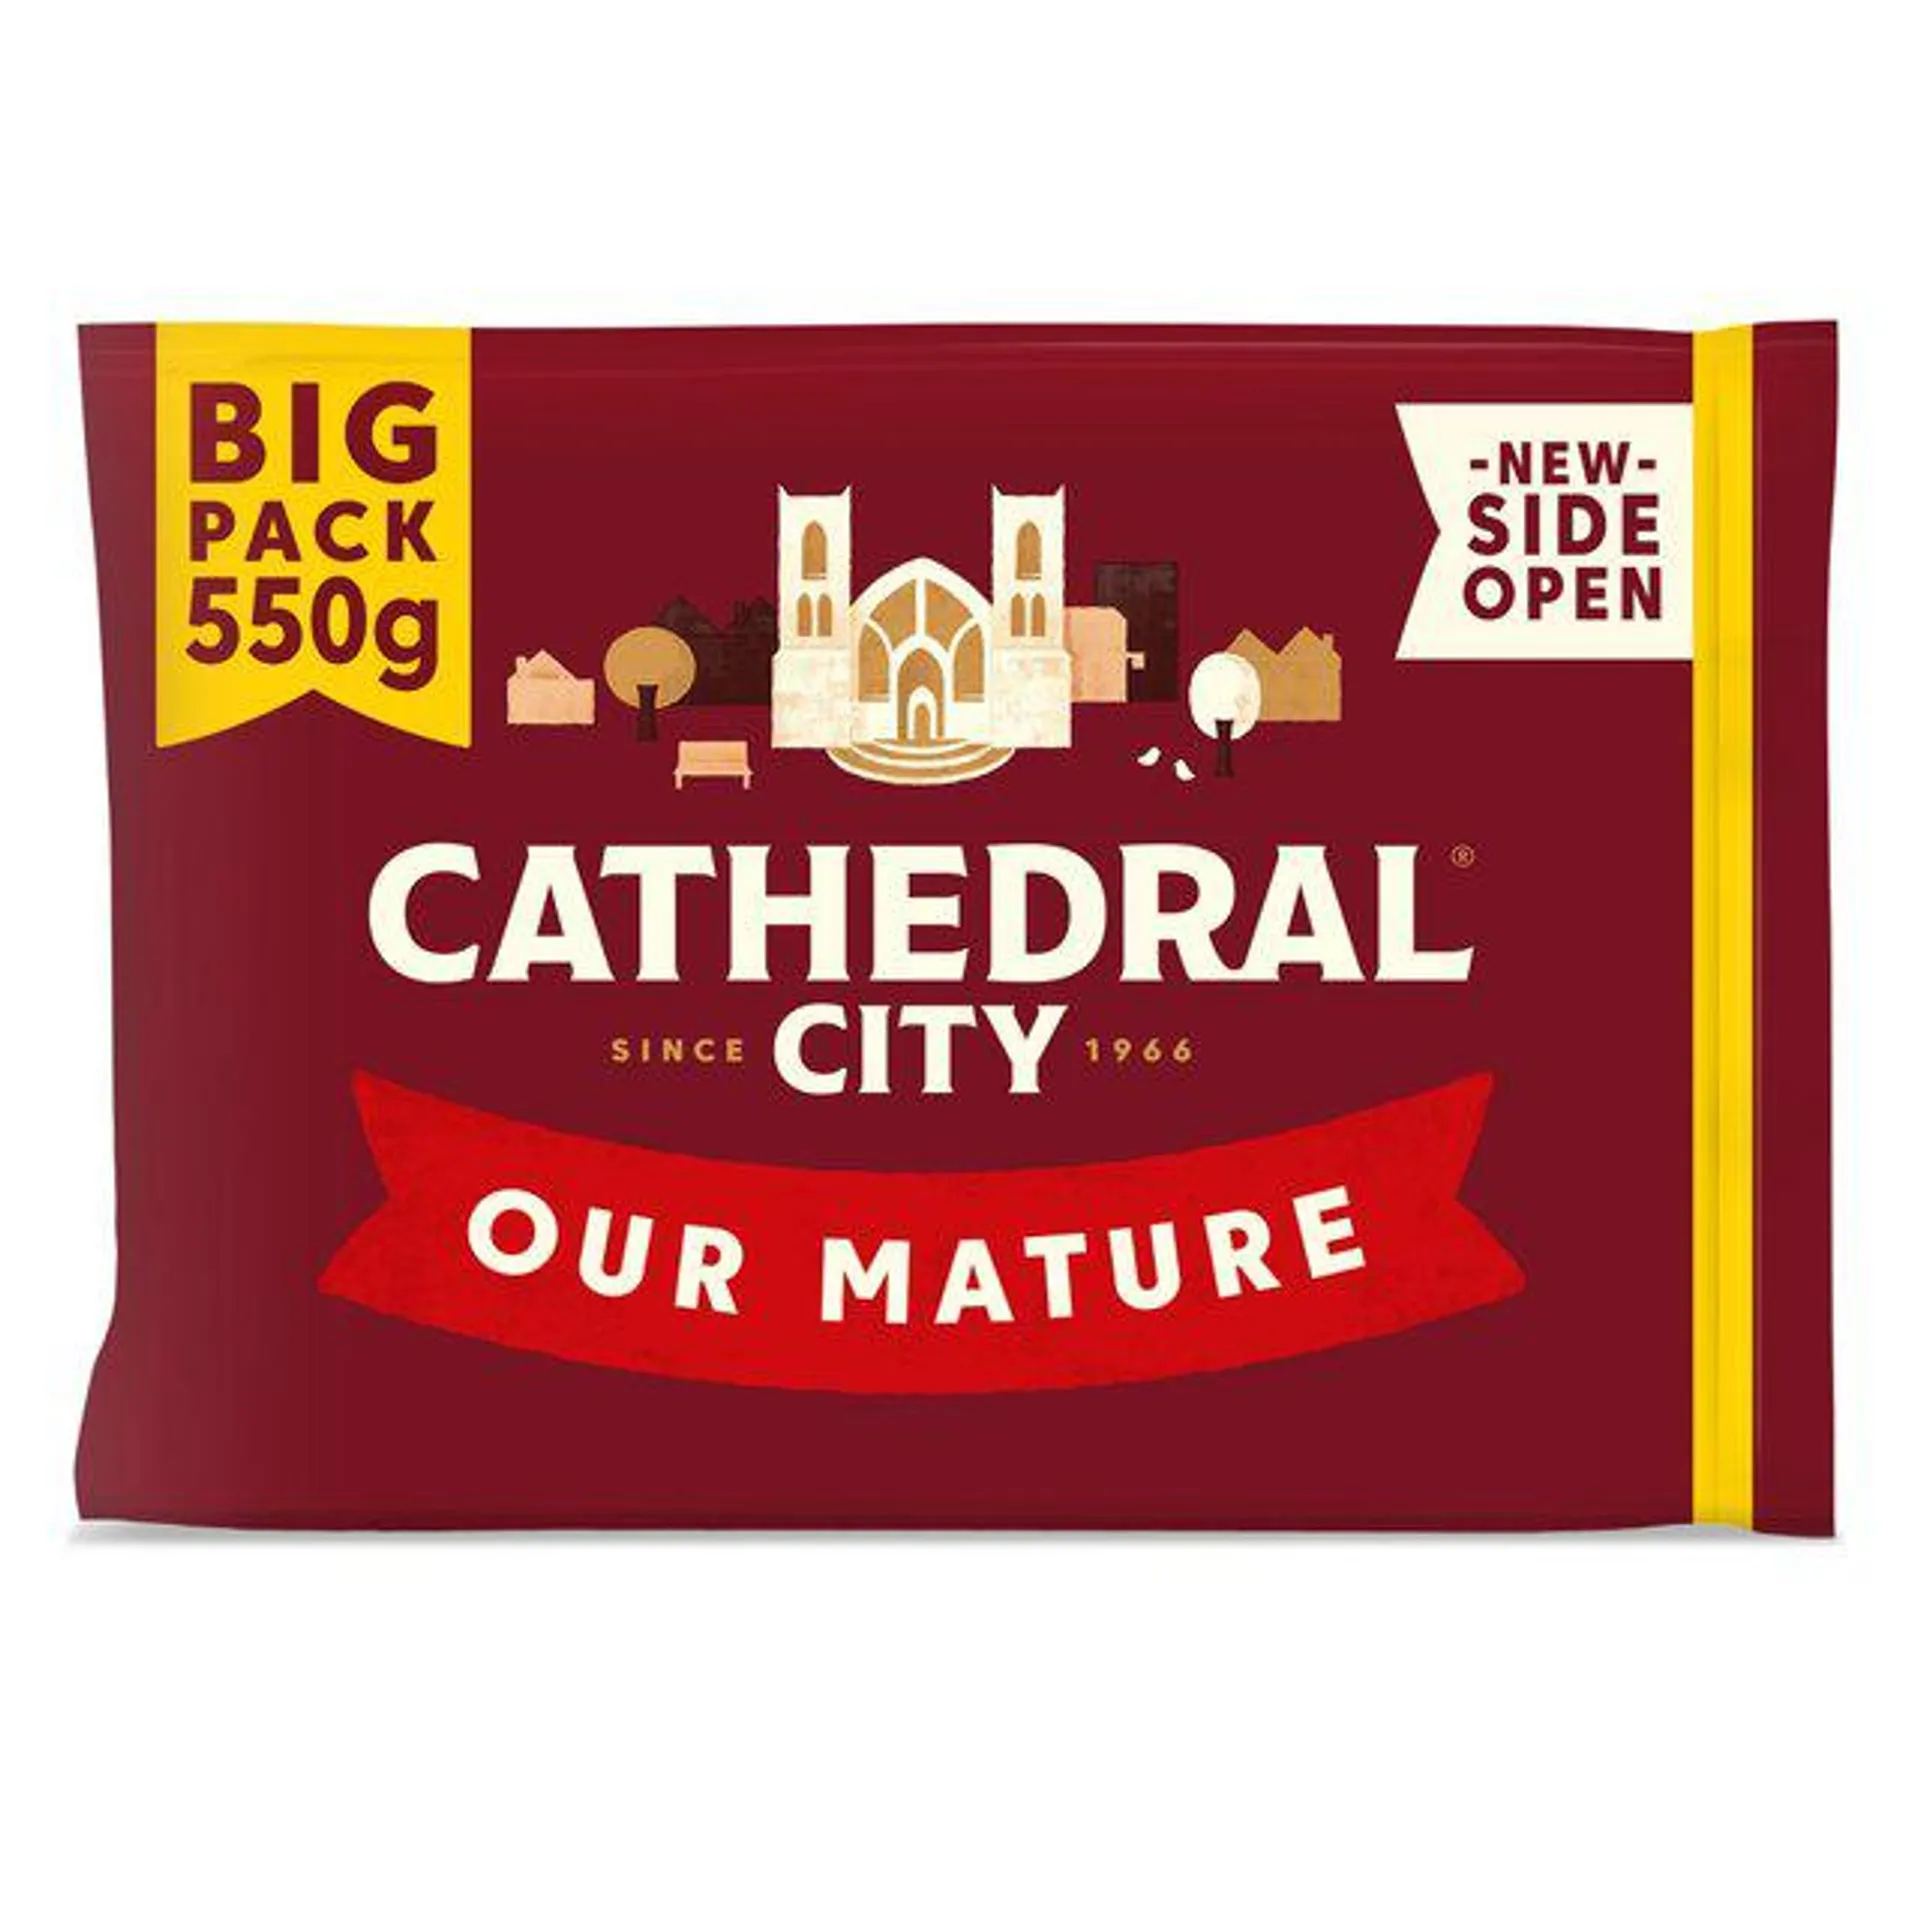 Cathedral City Mature Cheese 550g